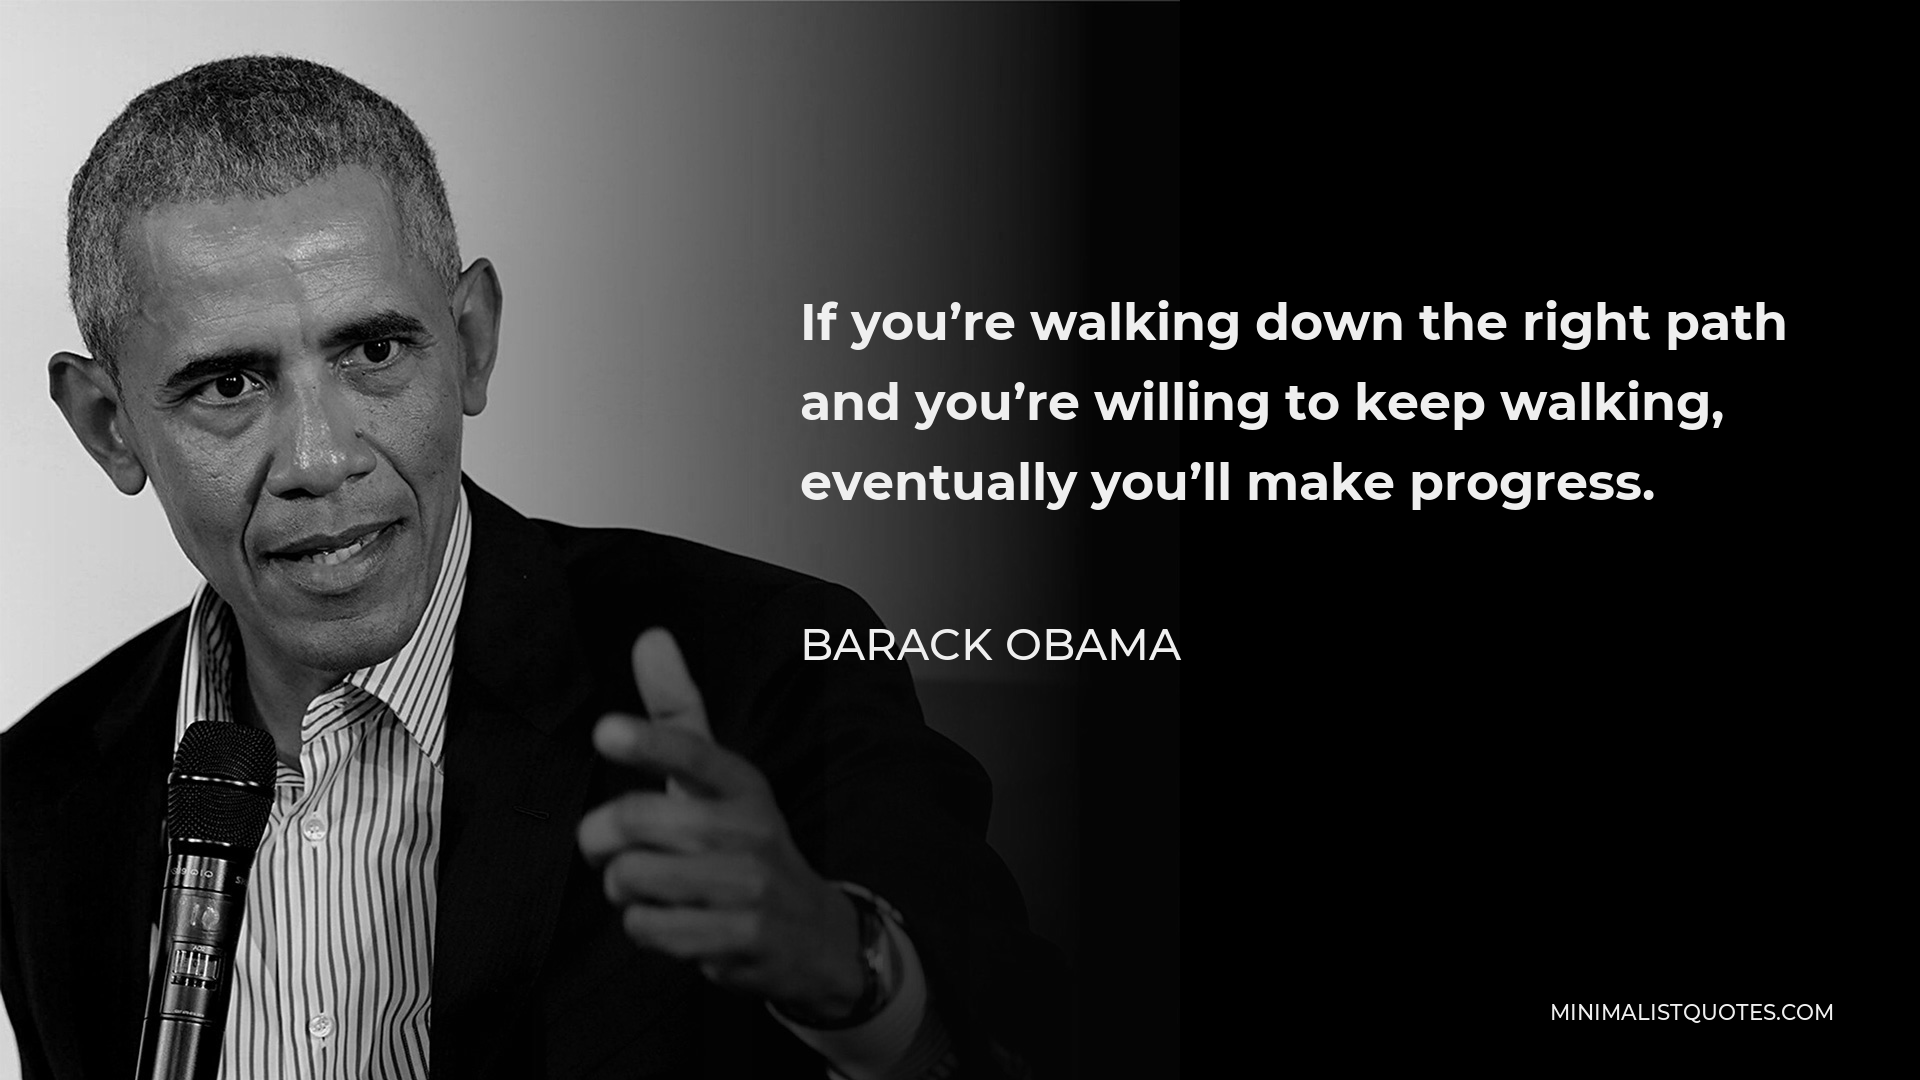 Barack Obama Quote - If you’re walking down the right path and you’re willing to keep walking, eventually you’ll make progress.